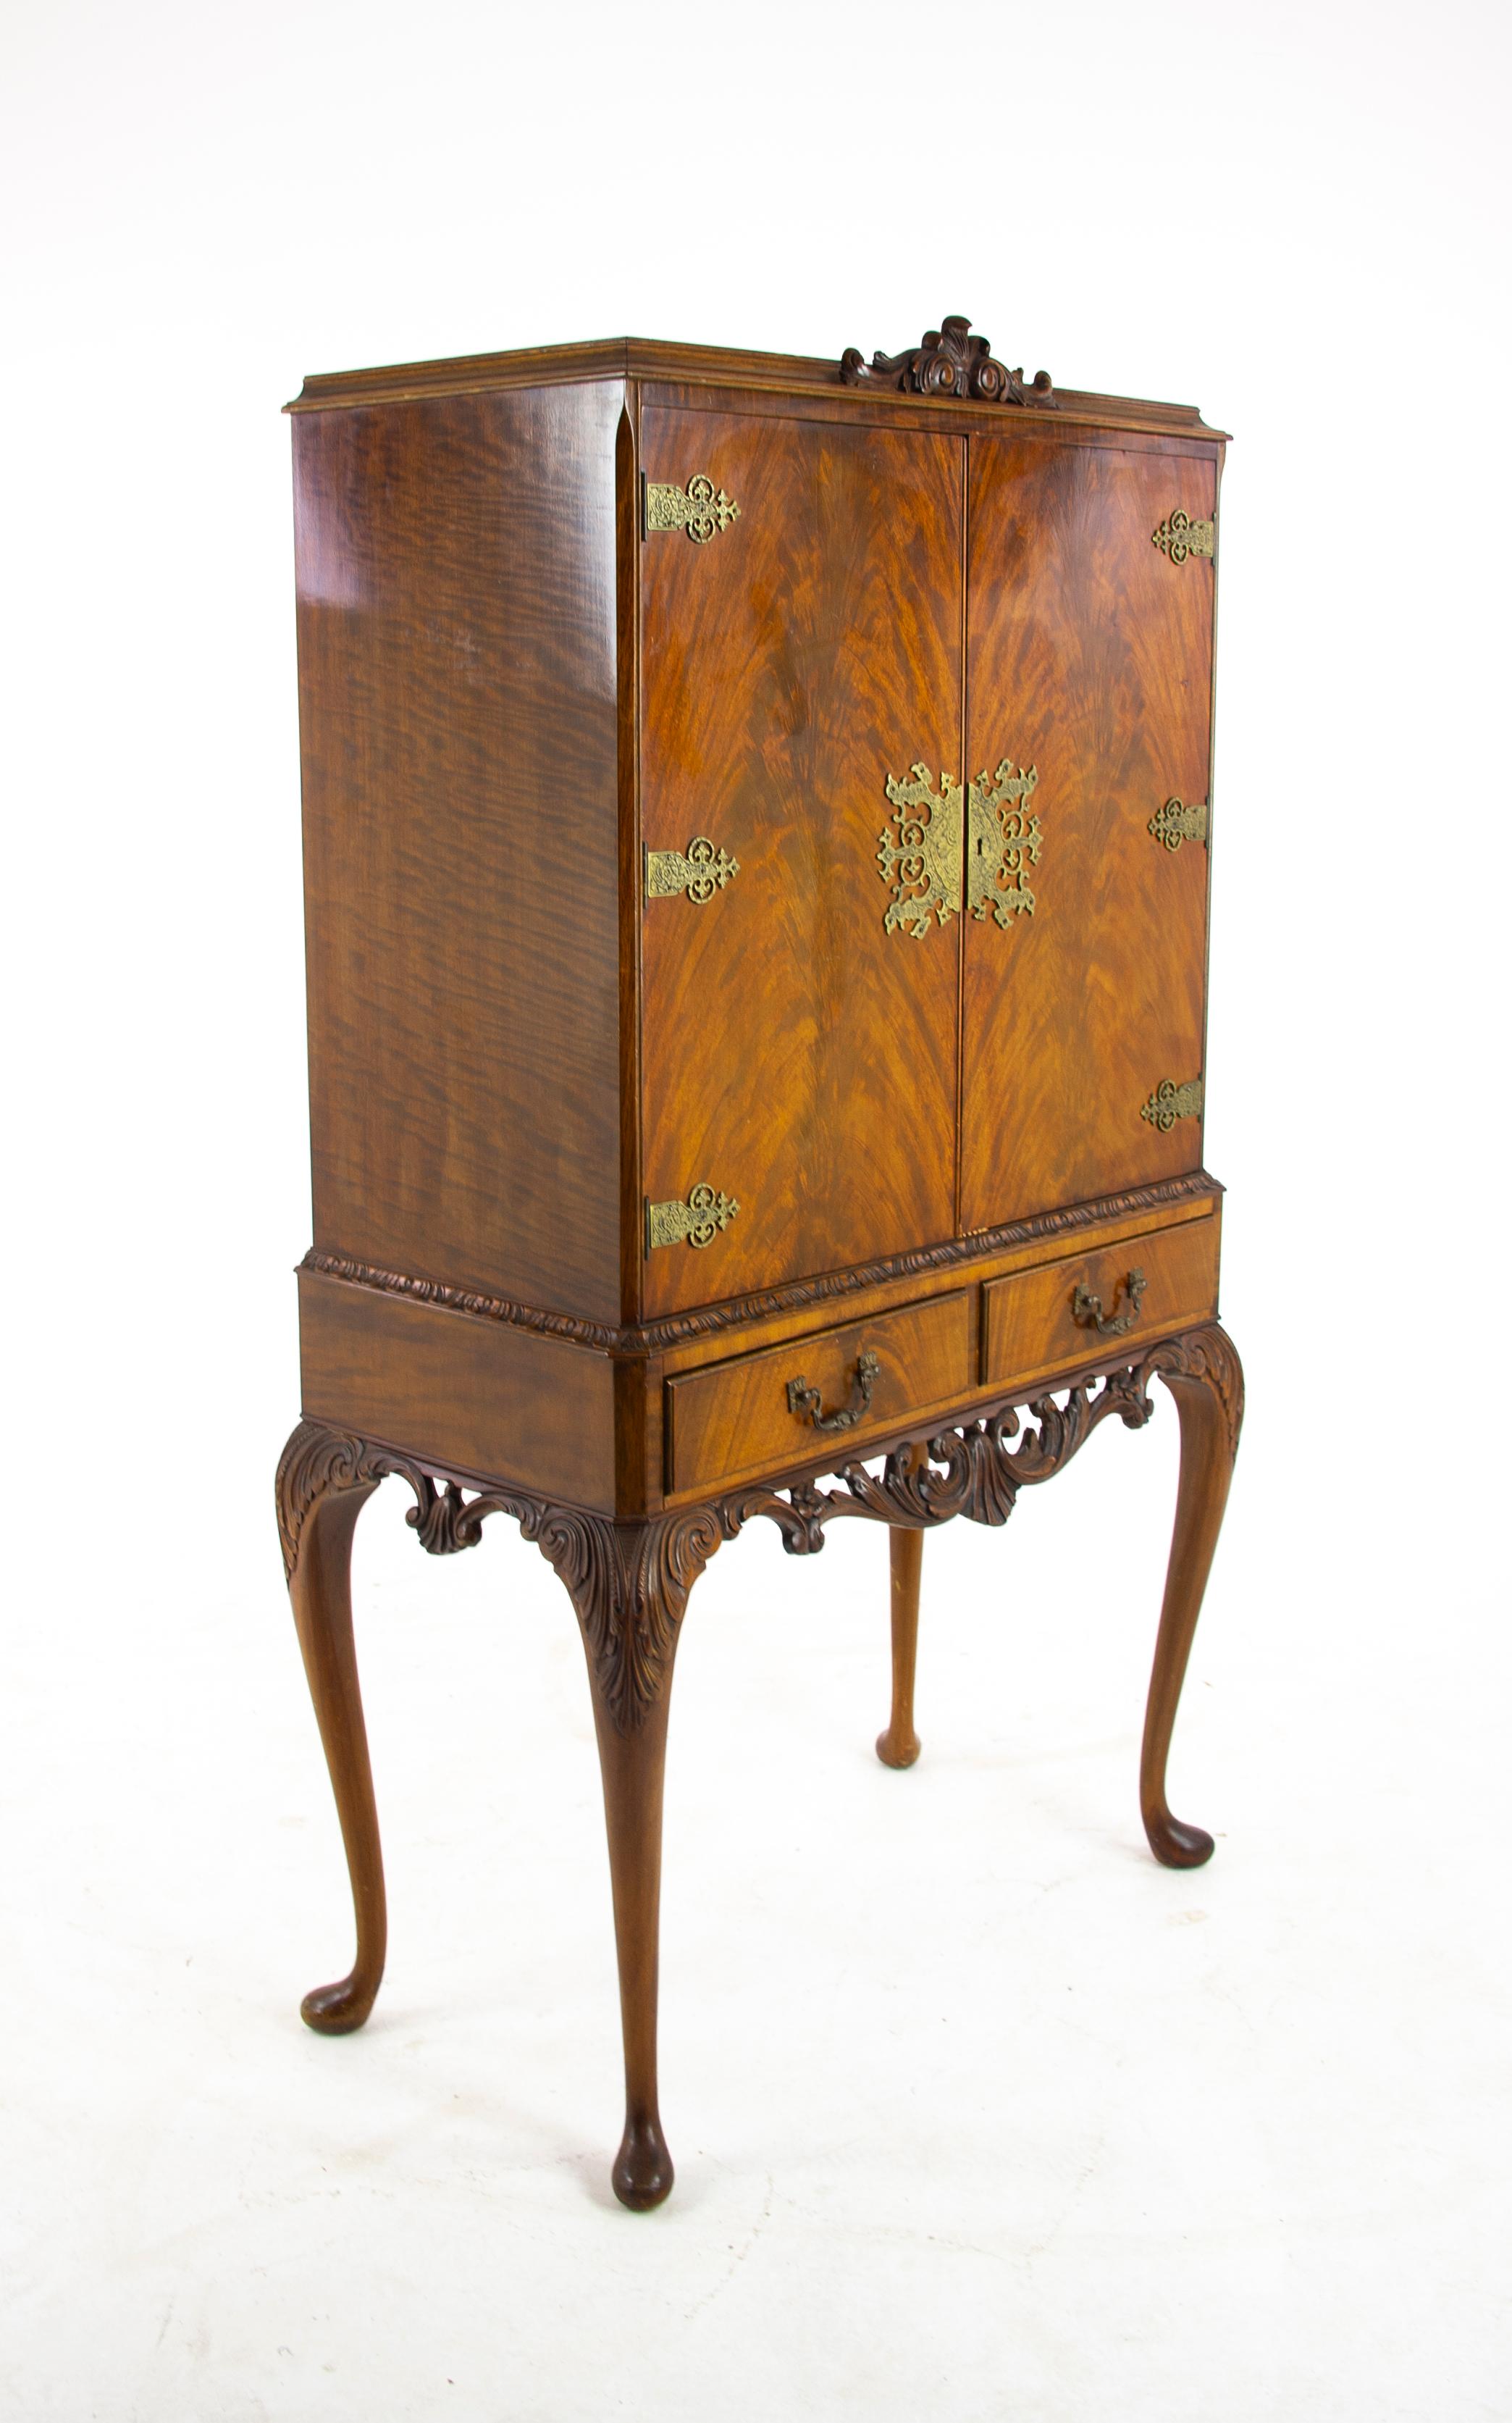 Antique drinks cabinet, vintage cocktail cabinet, Queen Anne cabinet, Scotland, 1930. Antique furniture, B1497

Scotland, 1930
With decorative and scrolled detail to the centre top
Two lively figured walnut doors
Brass lock plates and